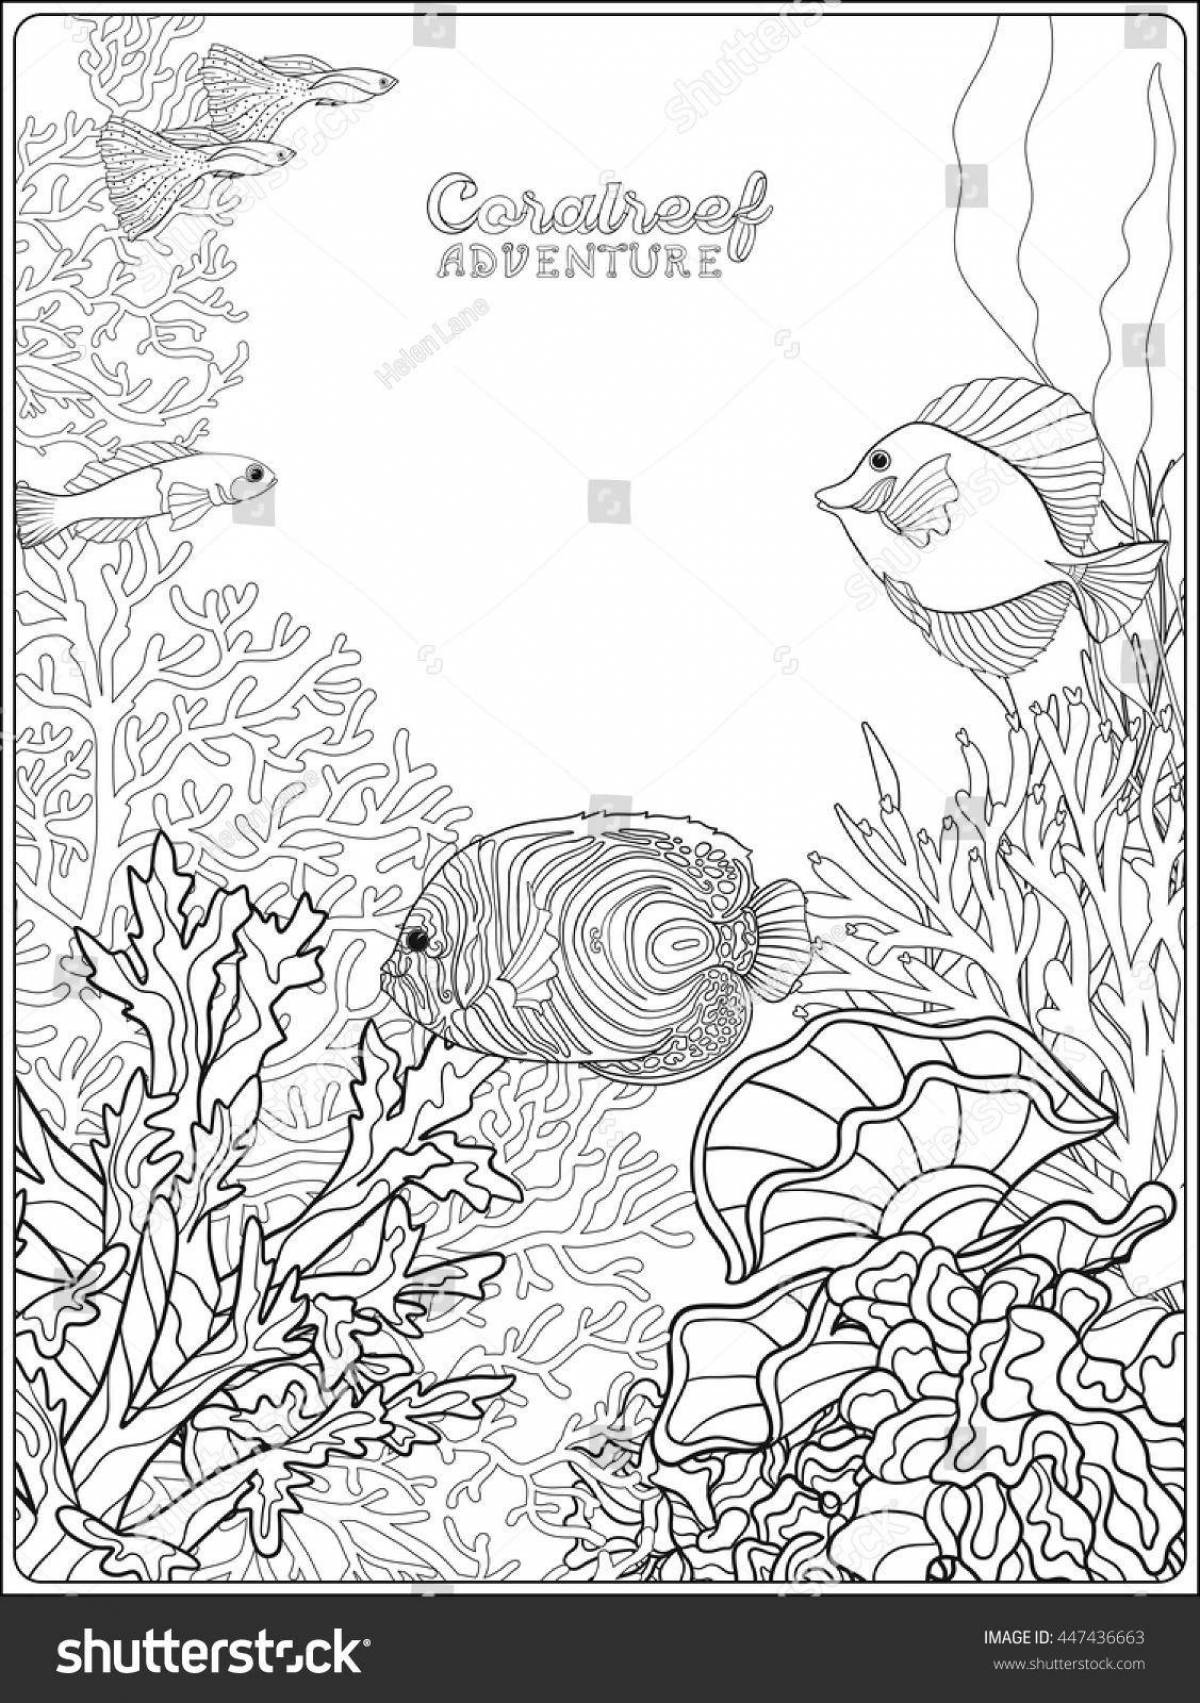 Exquisite coral reef coloring book